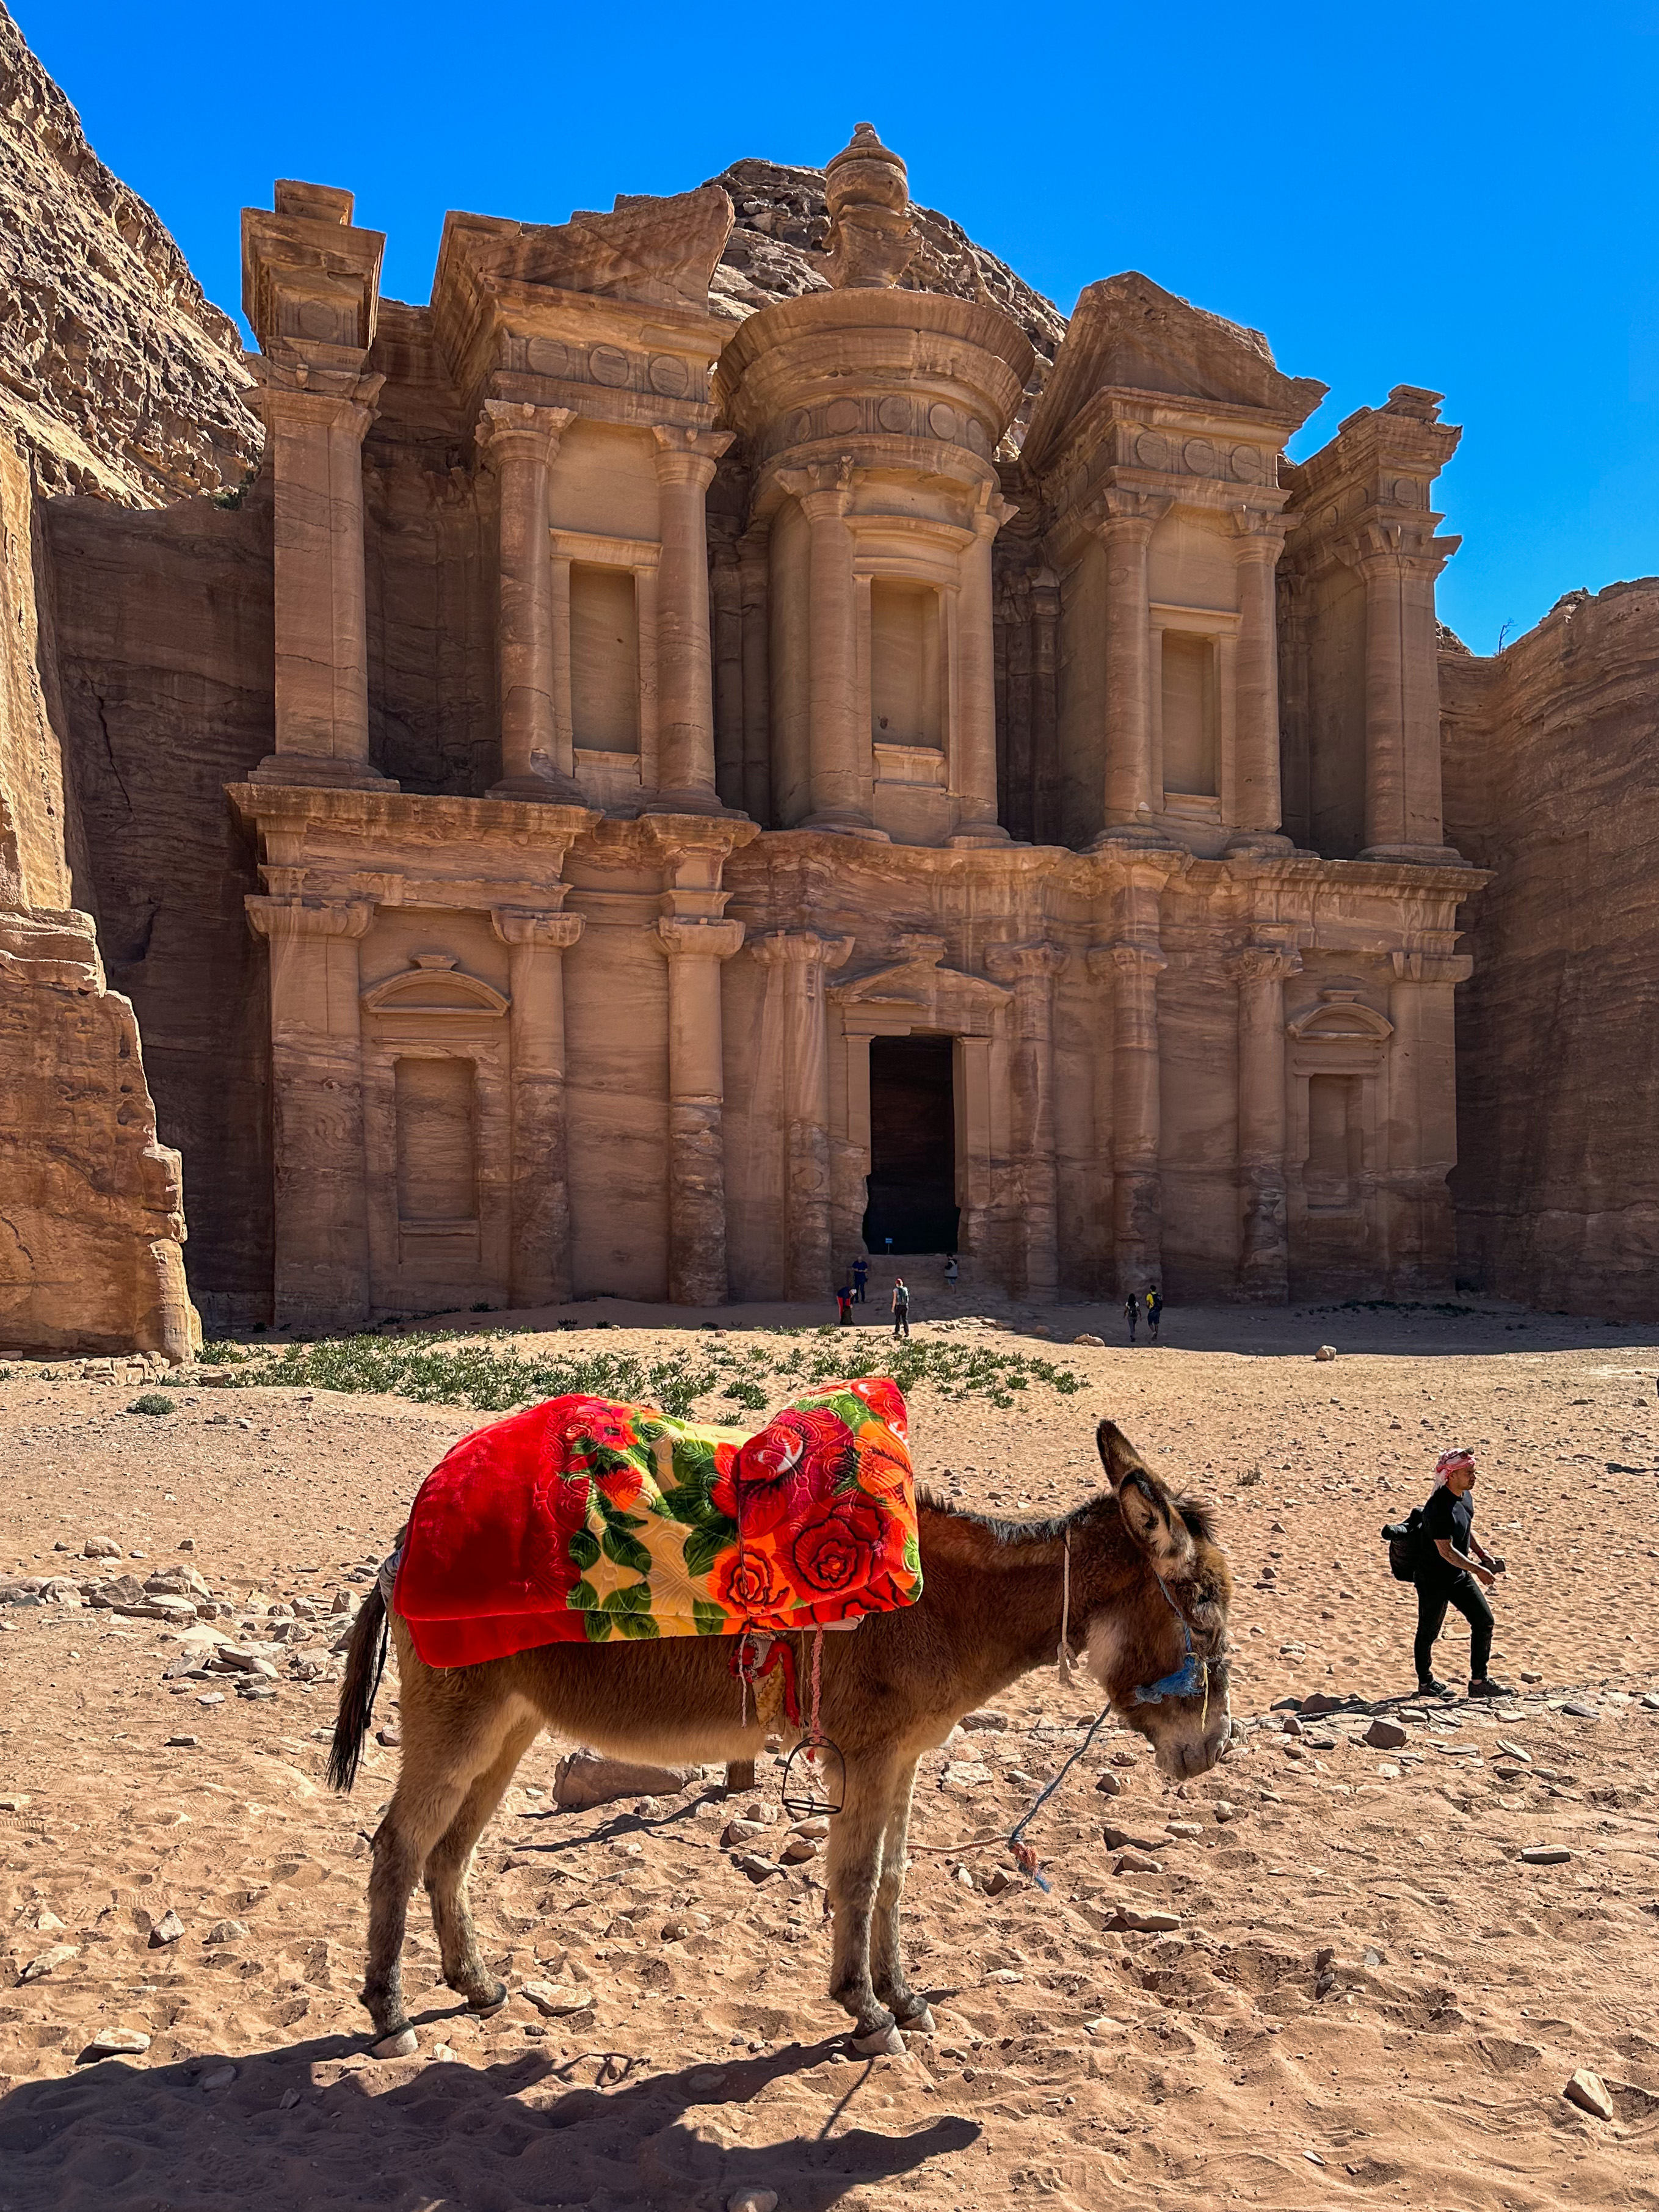 Arriving from the back entrance to the Monastery from Little Petra allows you to arrive before the crowds.